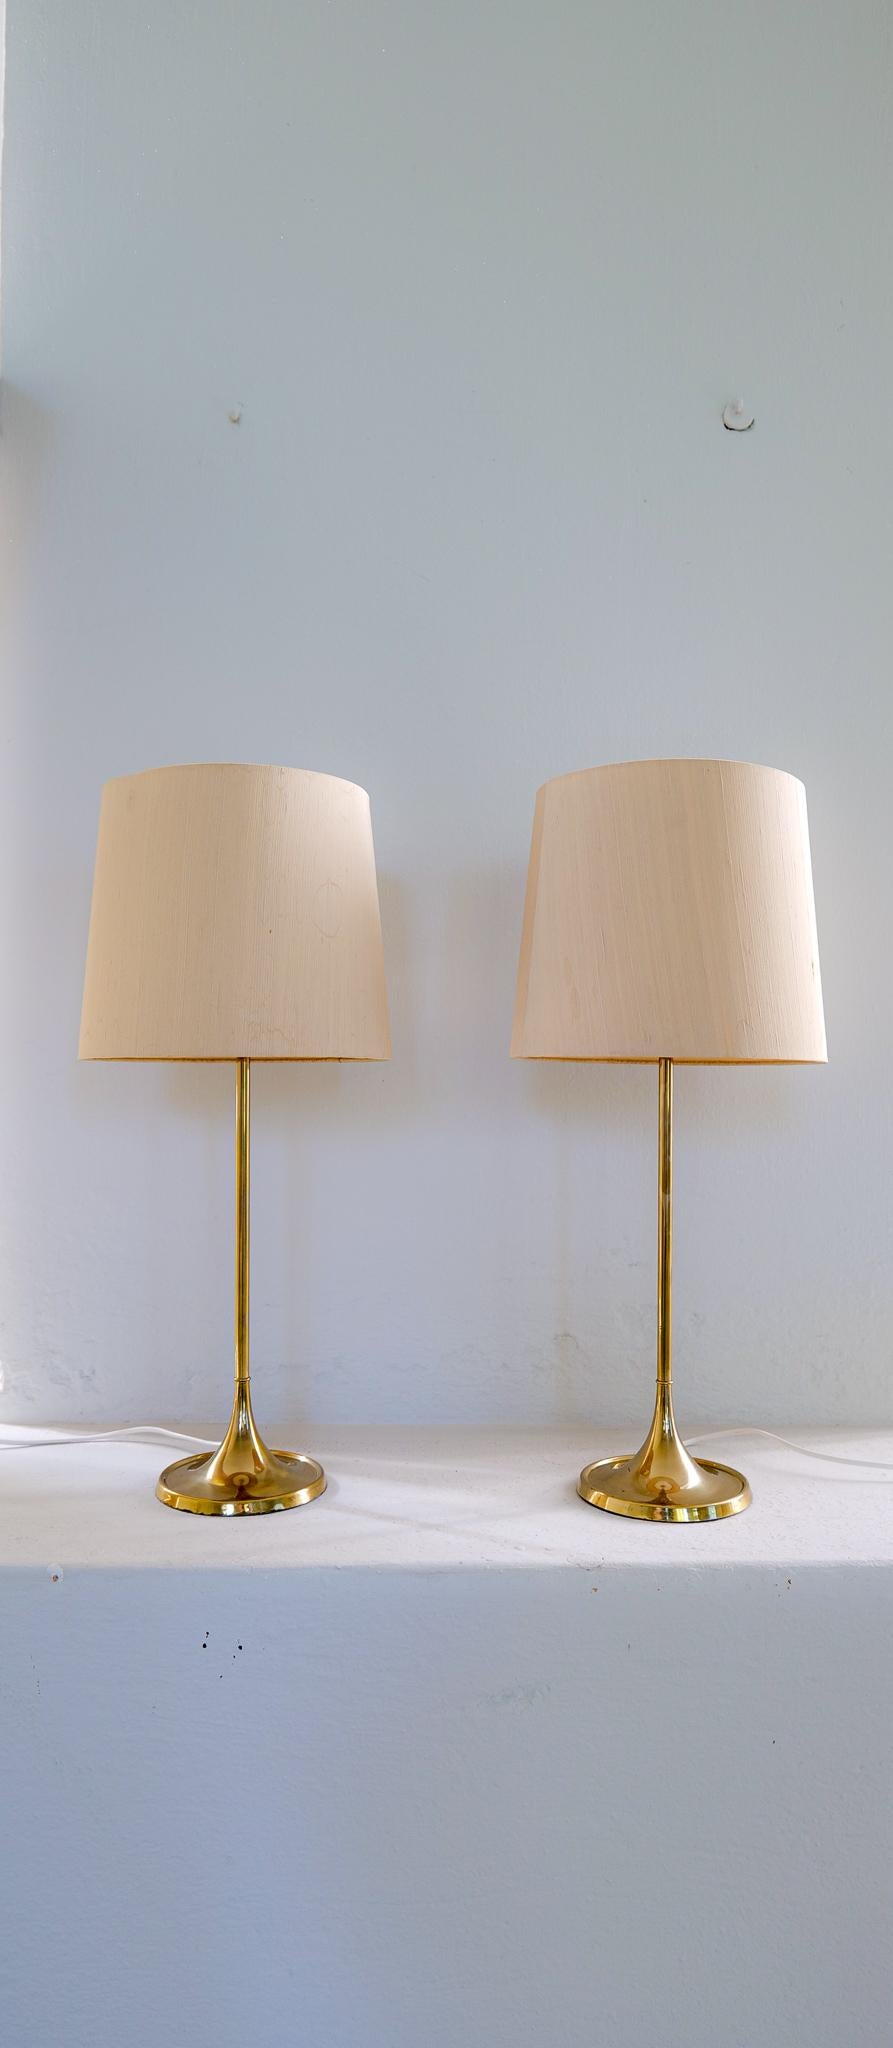 The small table version of the iconic Bergboms design. Cast iron base finished in brass. This pair of table lamps will give that great look to a vintage home or a twist to the modern home. This pair with original shades.

Good vintage working